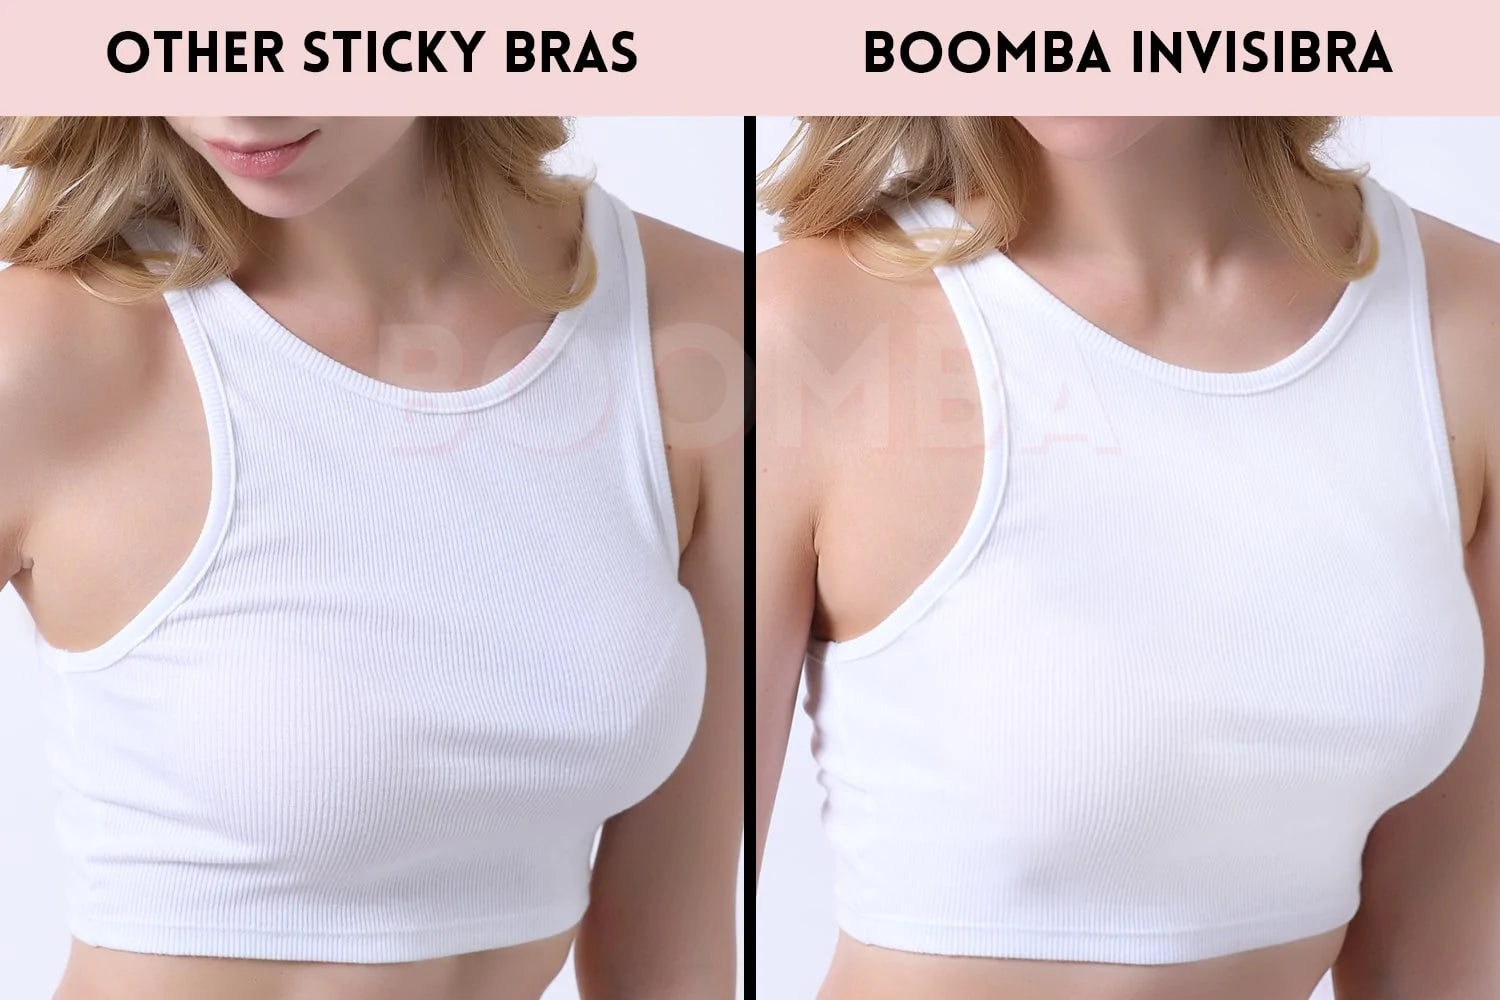 Boomba Invisibra before and after